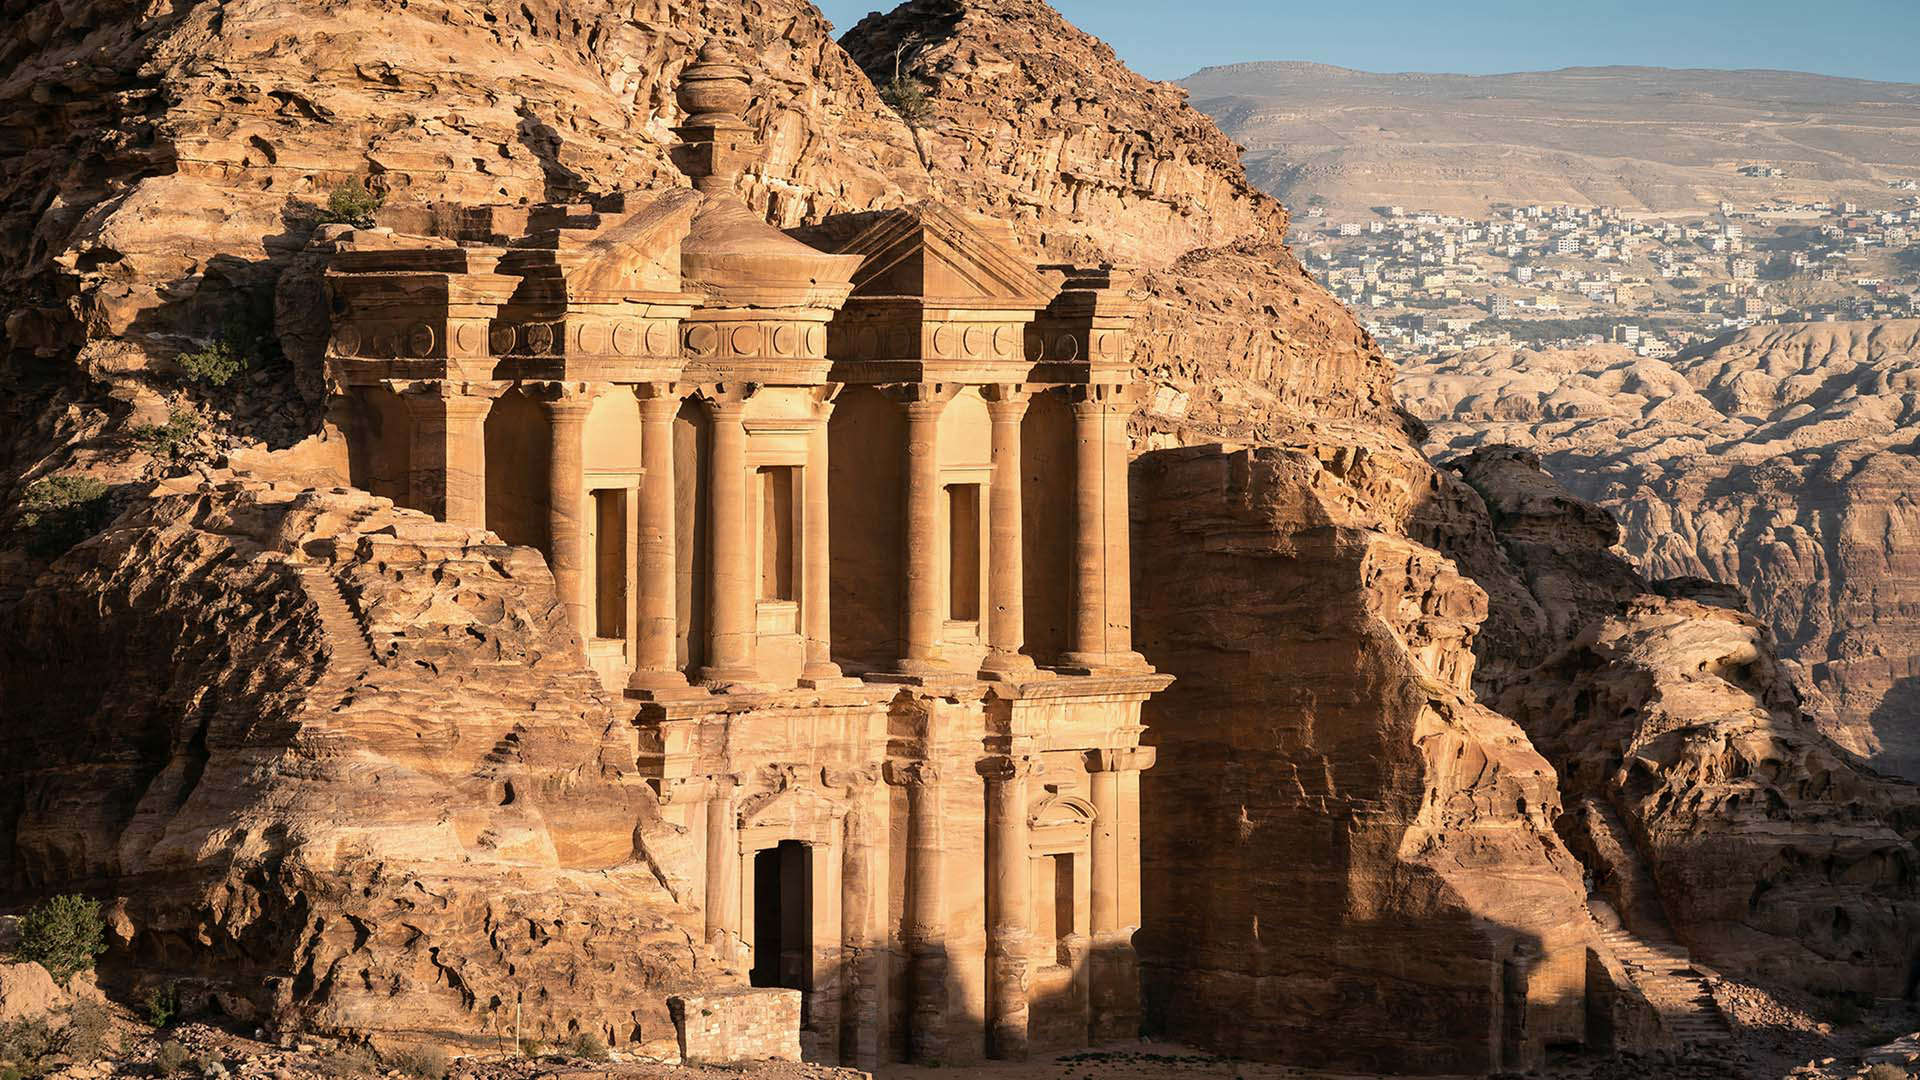 Tombs at the lost city of Petra